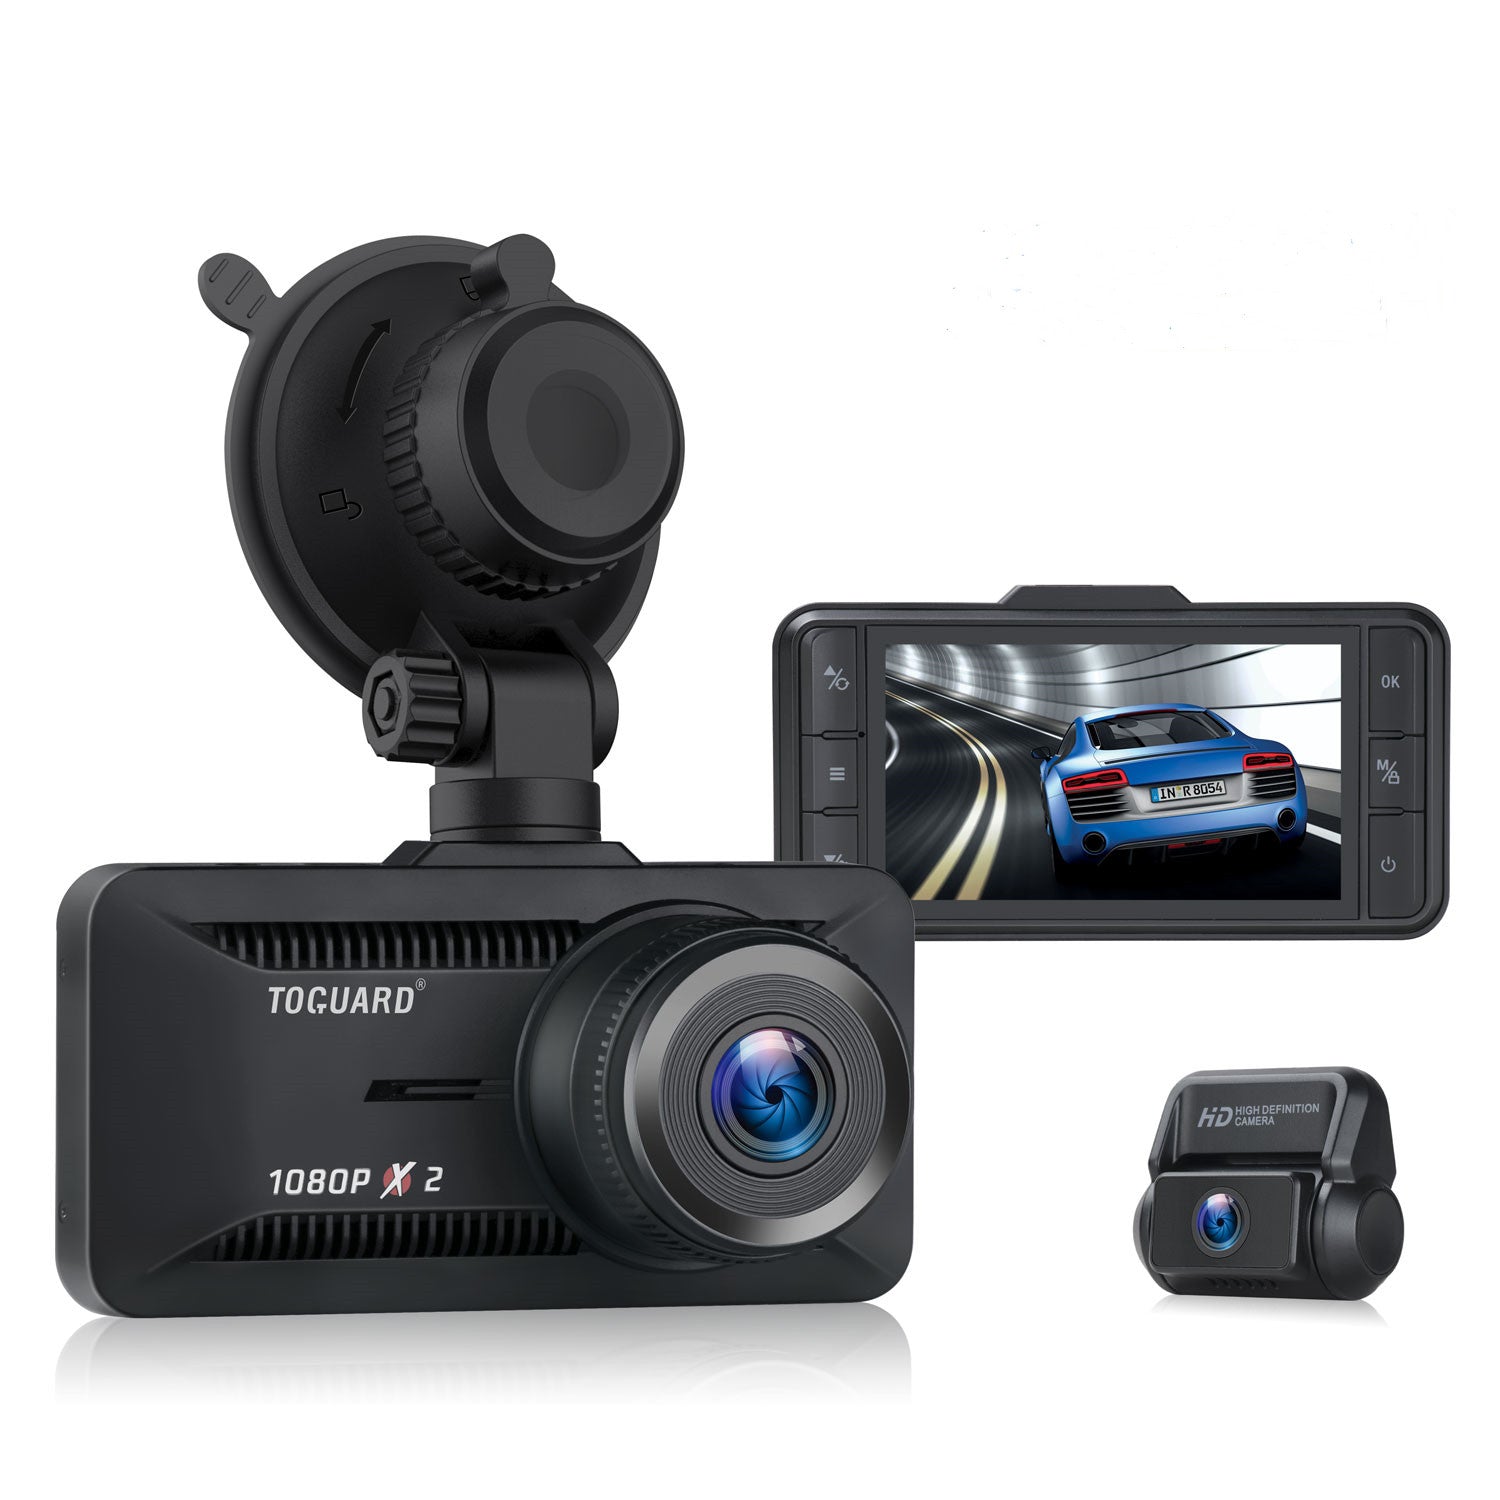 Campark Dual Dash Cam 1080P Dash Cam Front and Inside Dash Camera for Cars  with GPS Tracking, Inside IR Night Vision, Parking Monitor, Loop Recording